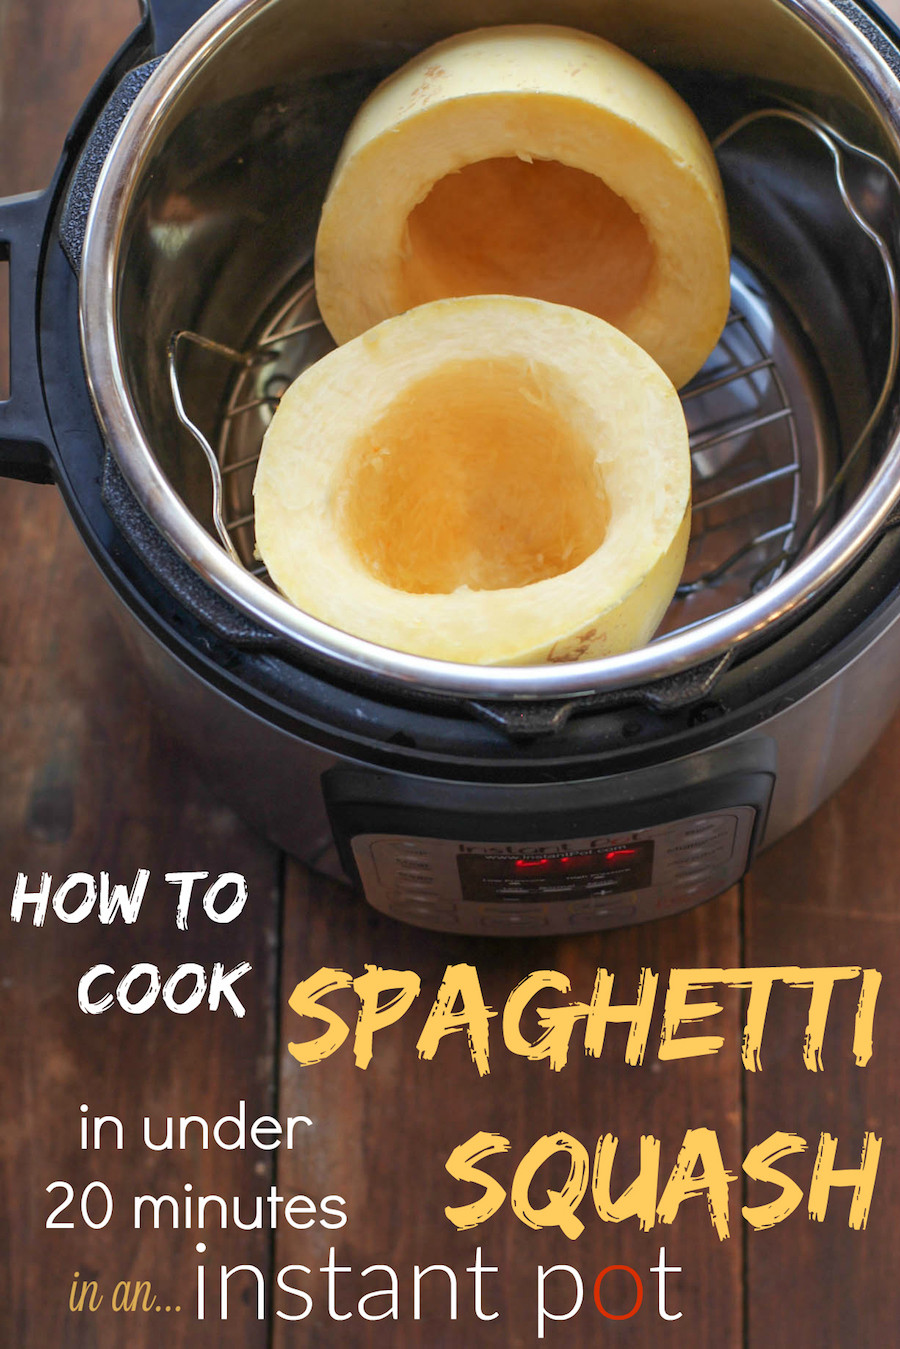 Spaghetti Squash In Instant Pot
 How To Cook Instant Pot Spaghetti Squash in Under 20